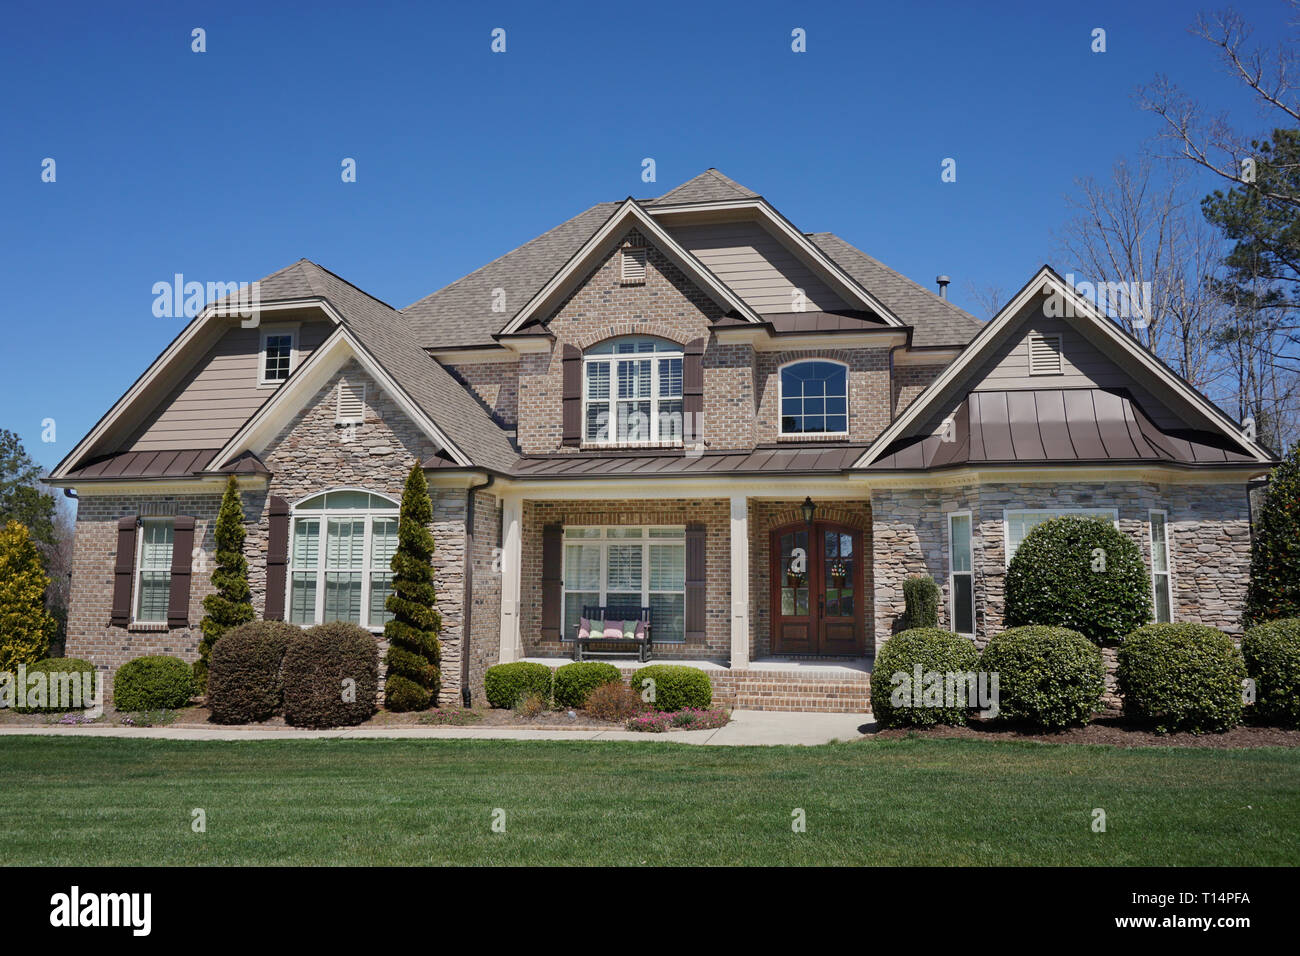 Suburban Home With A Stone And Brick Exterior Stock Photo Alamy